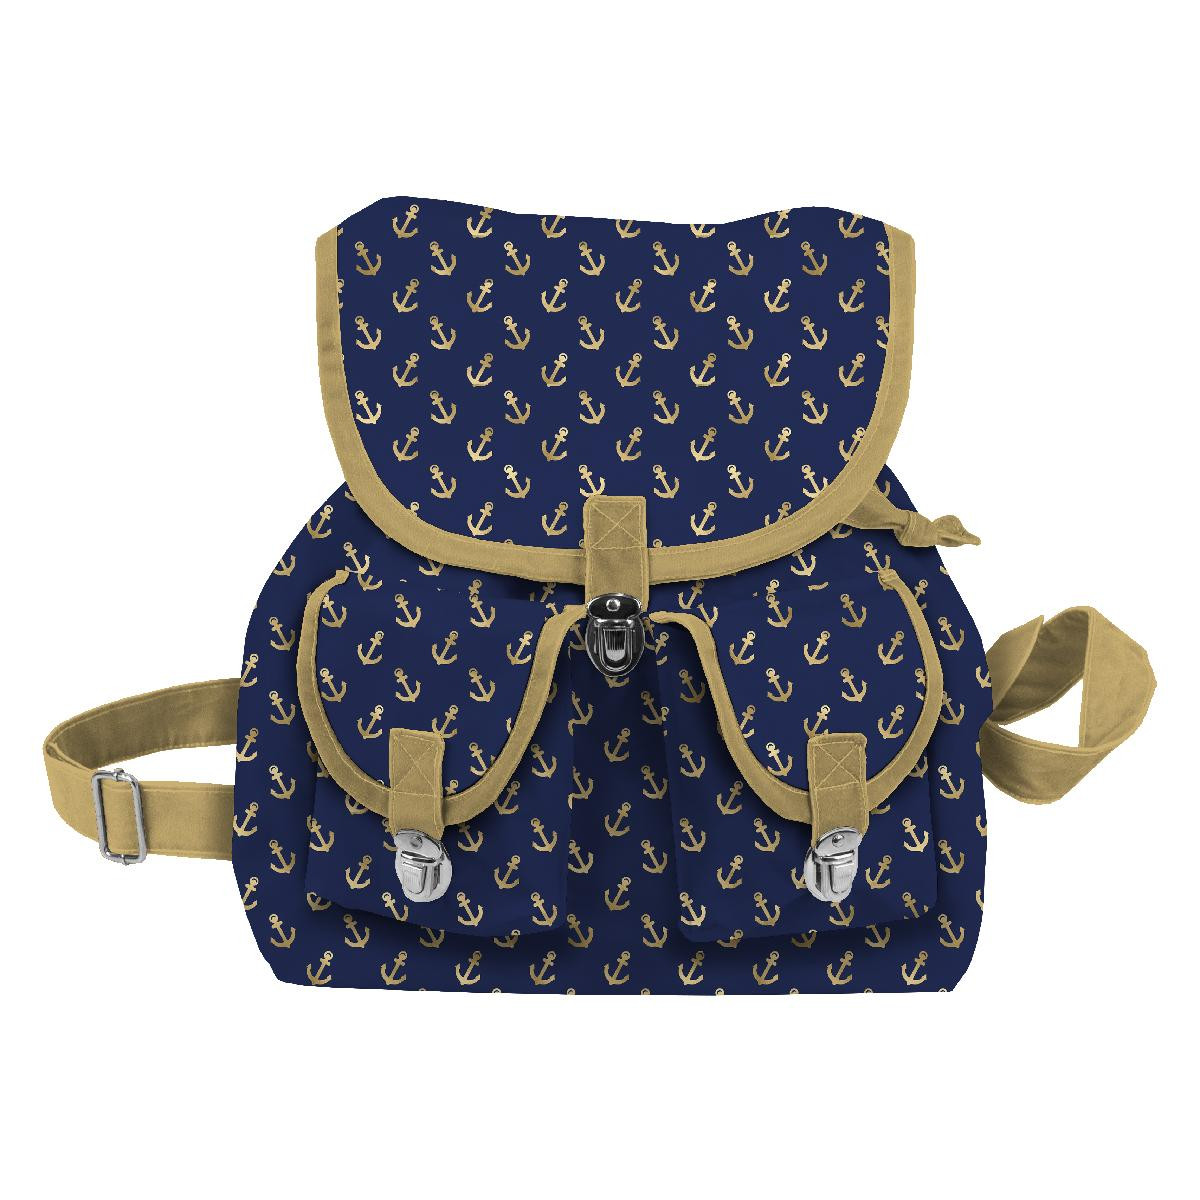 VINTAGE BACKPACK -  MINI GOLD ANCHORS - sewing set